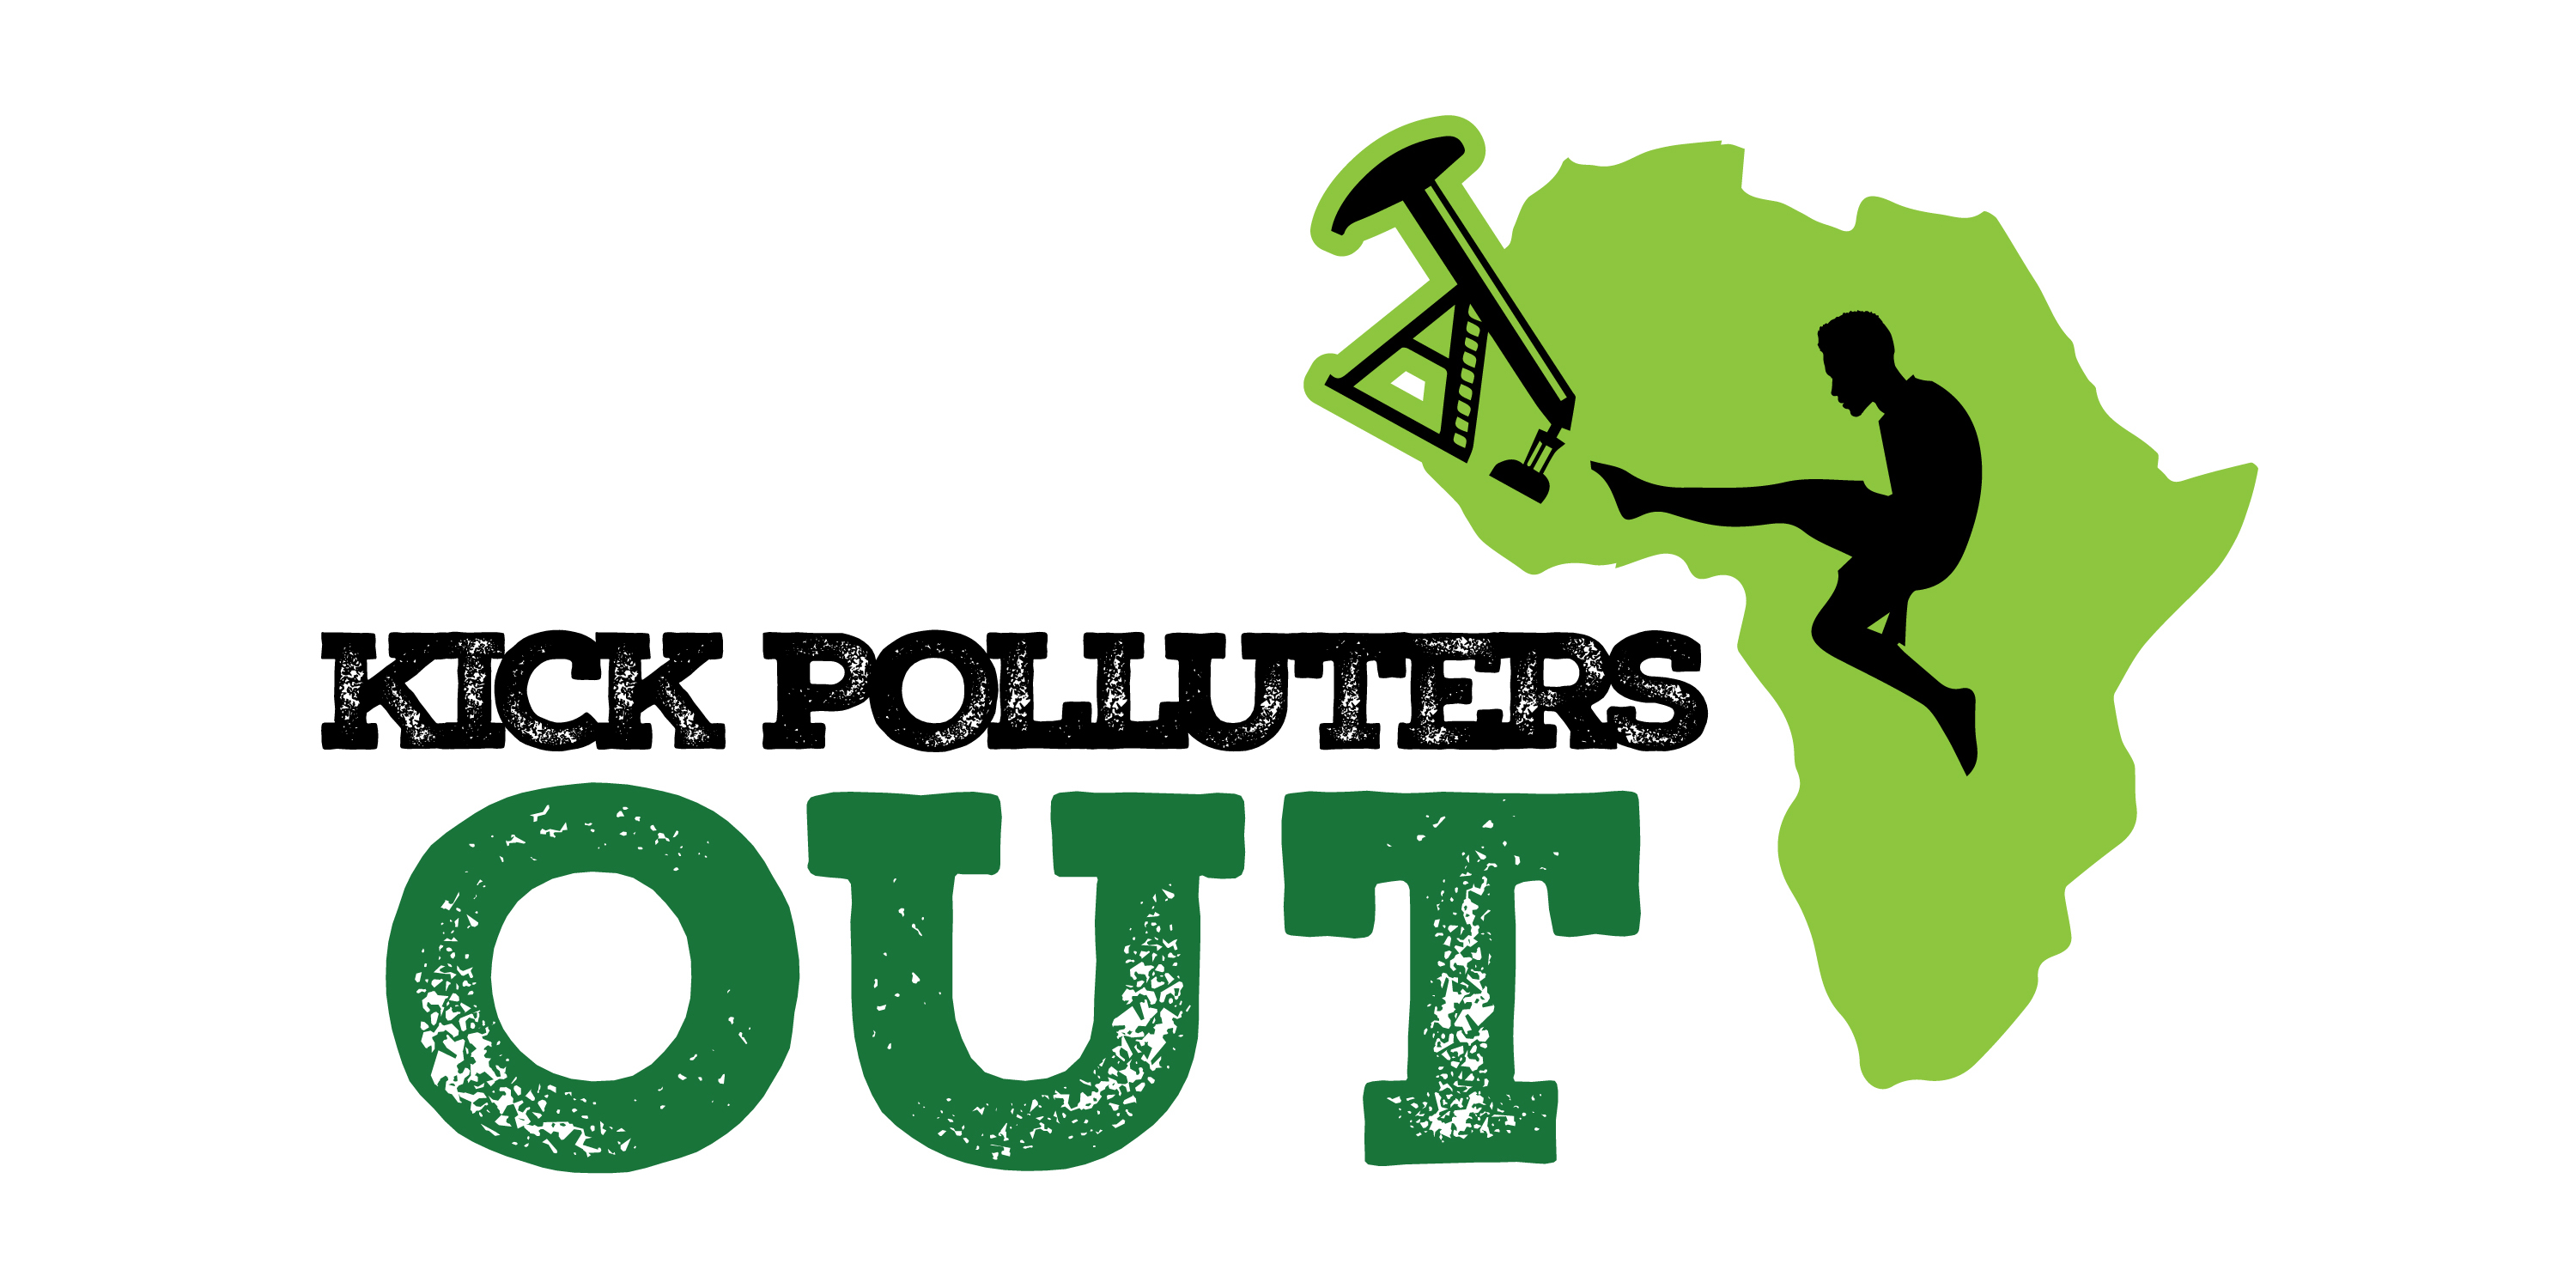 Kick Polluters Out